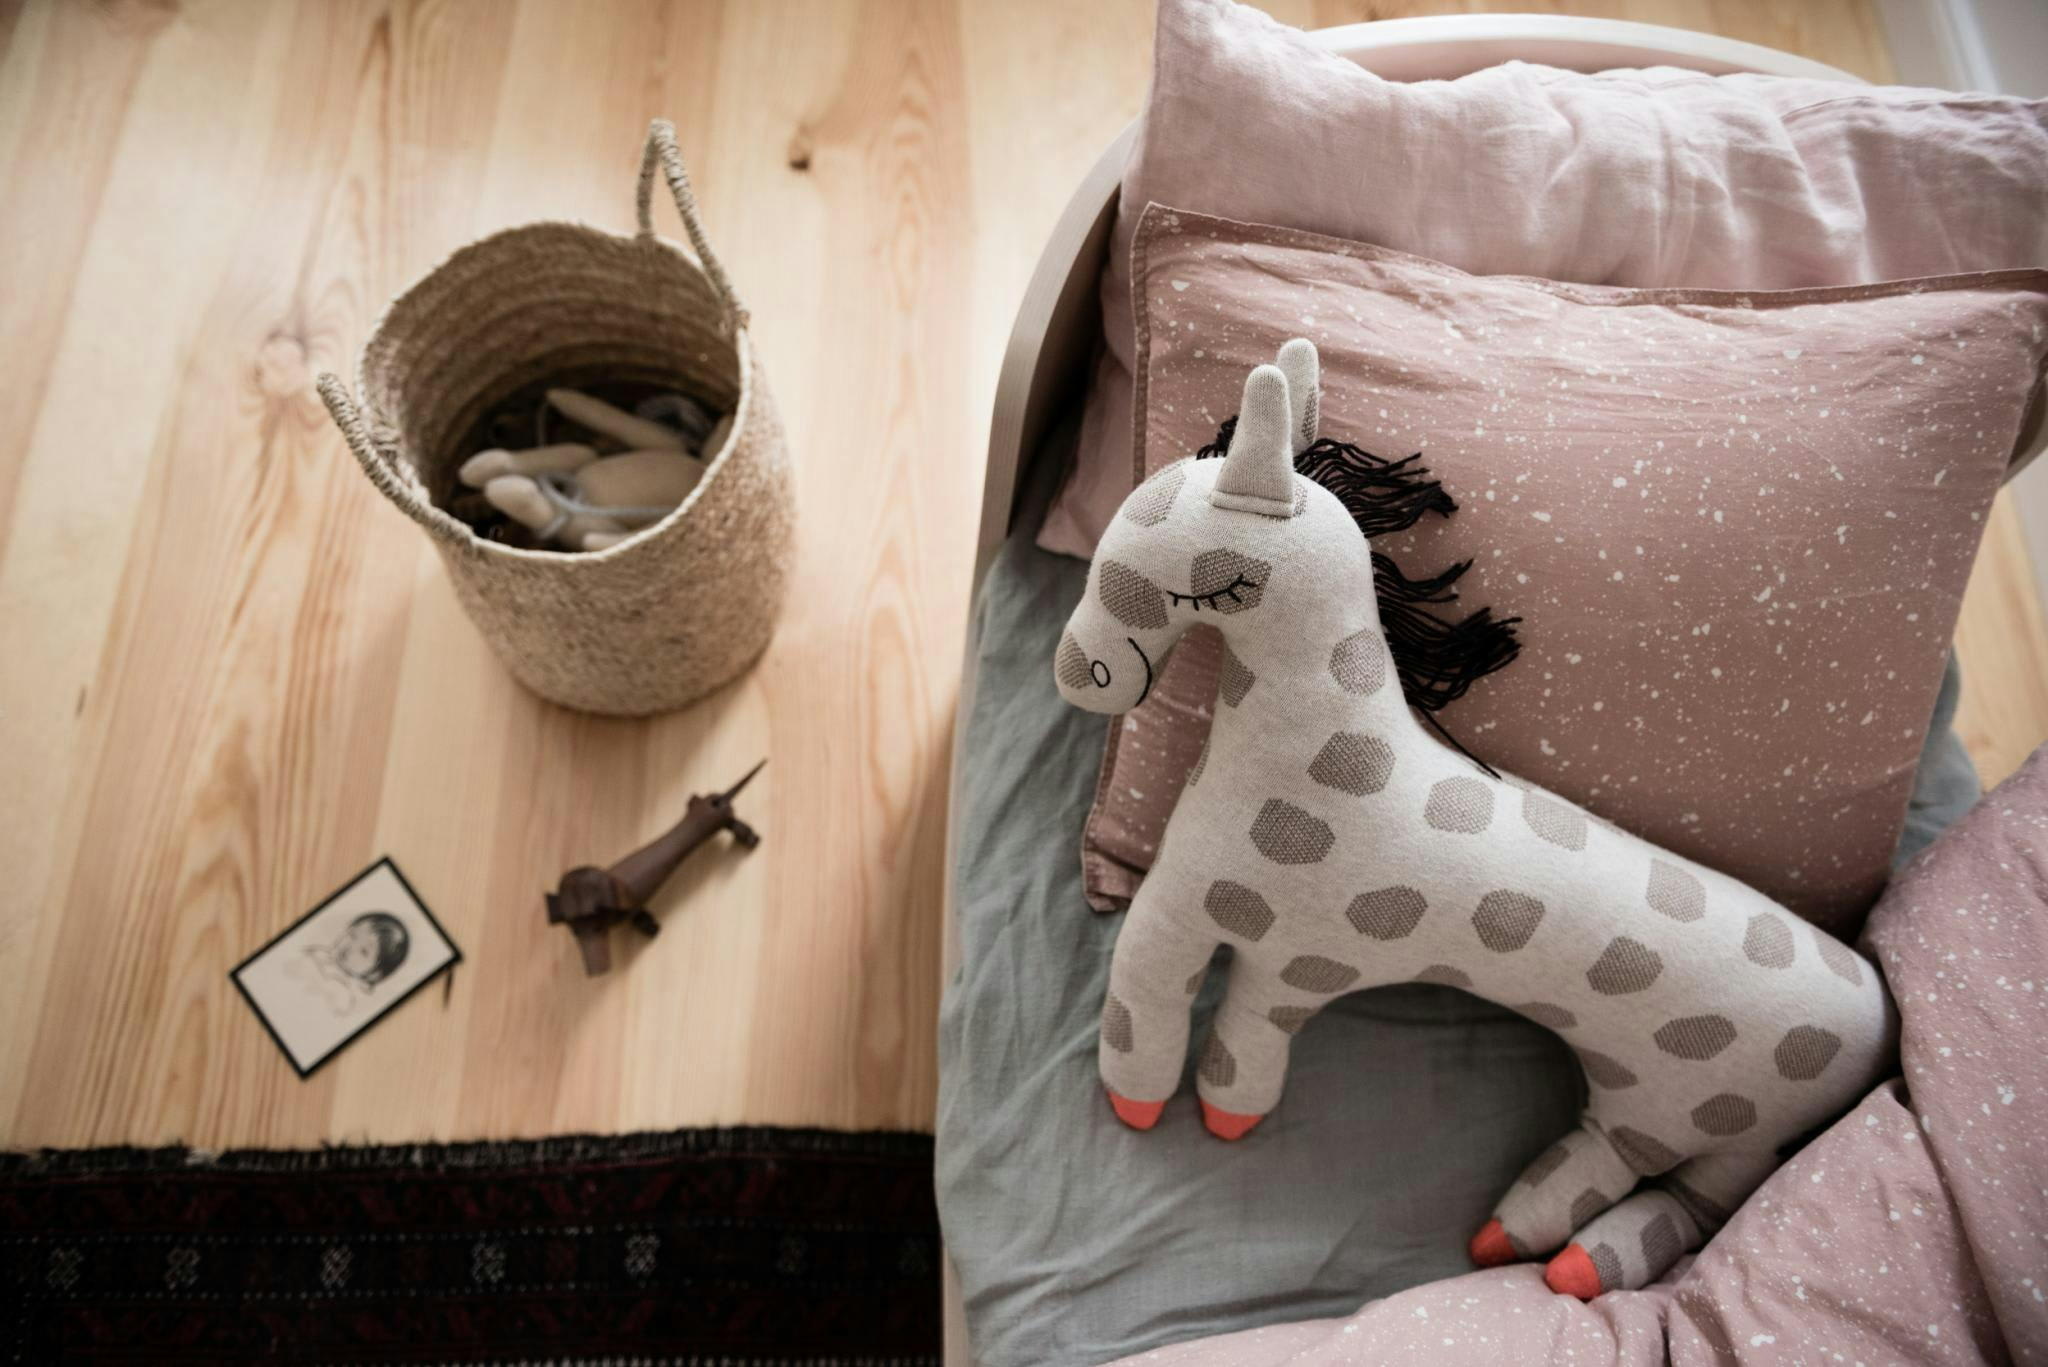 The image features a bedroom with a wooden floor and a bed. On the bed, there is a small stuffed horse, which is a popular toy for children. The horse is placed next to a basket, which is also on the bed.

In addition to the bed and the stuffed horse, there are two books on the bed, one on the left side and the other on the right side. A clock is also visible on the wall, adding to the cozy atmosphere of the room.